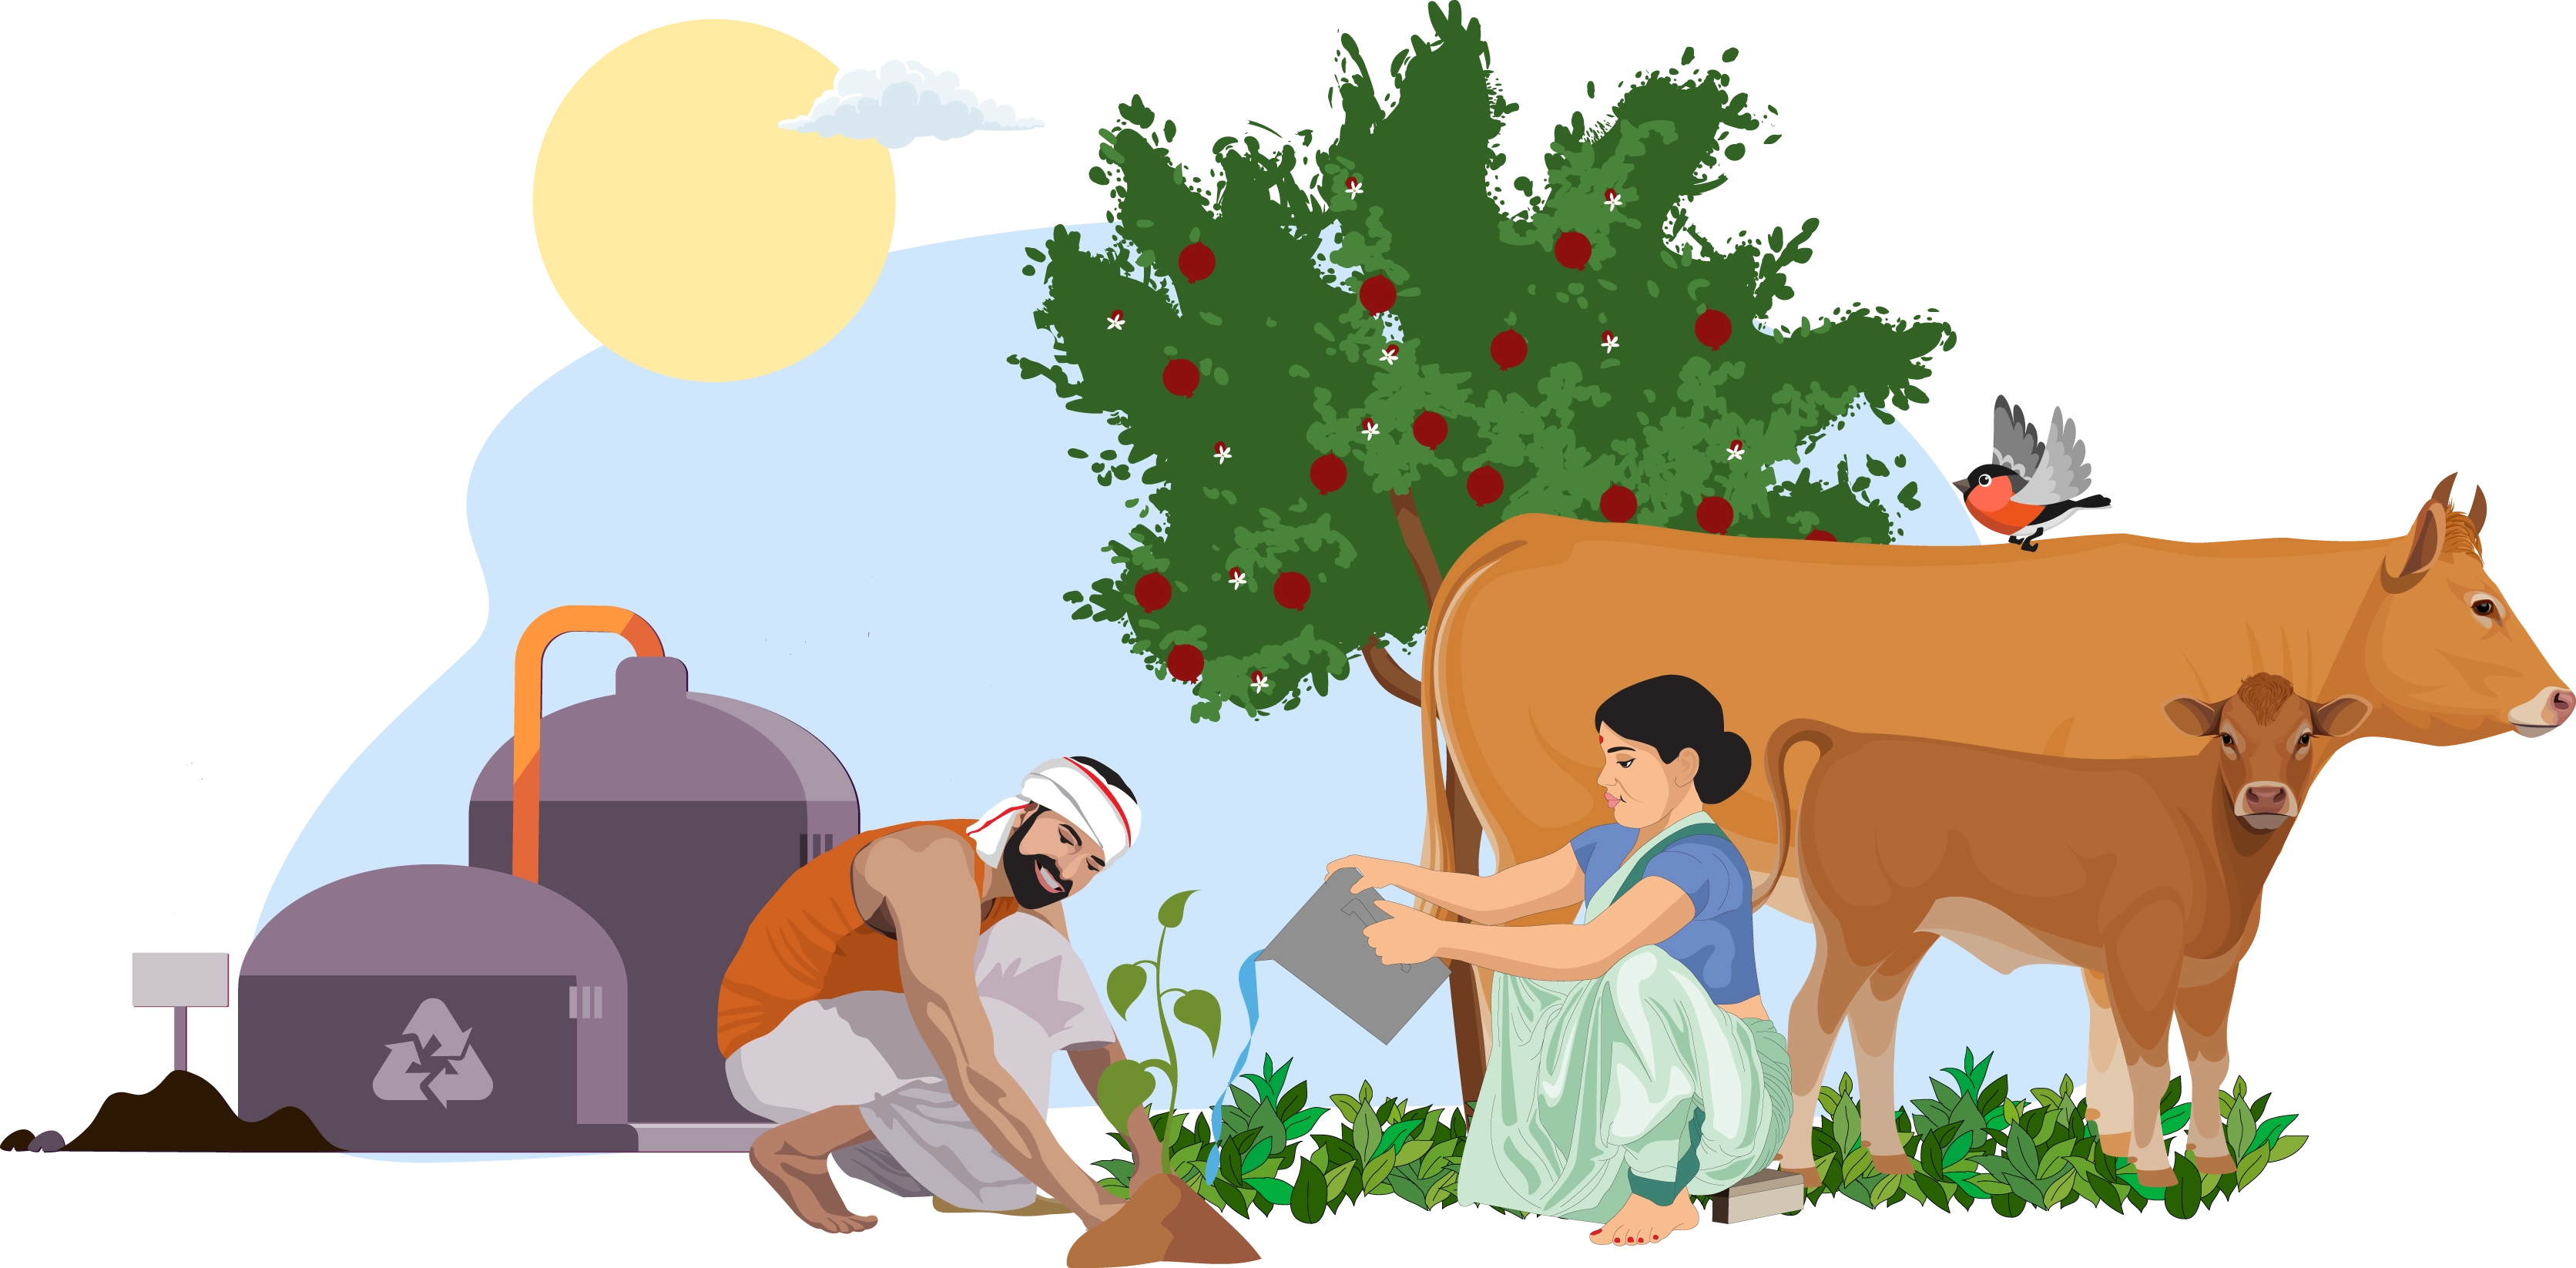 Two people planting a sapling, surrounded by cows, biodigestor and a fruit bearing tree